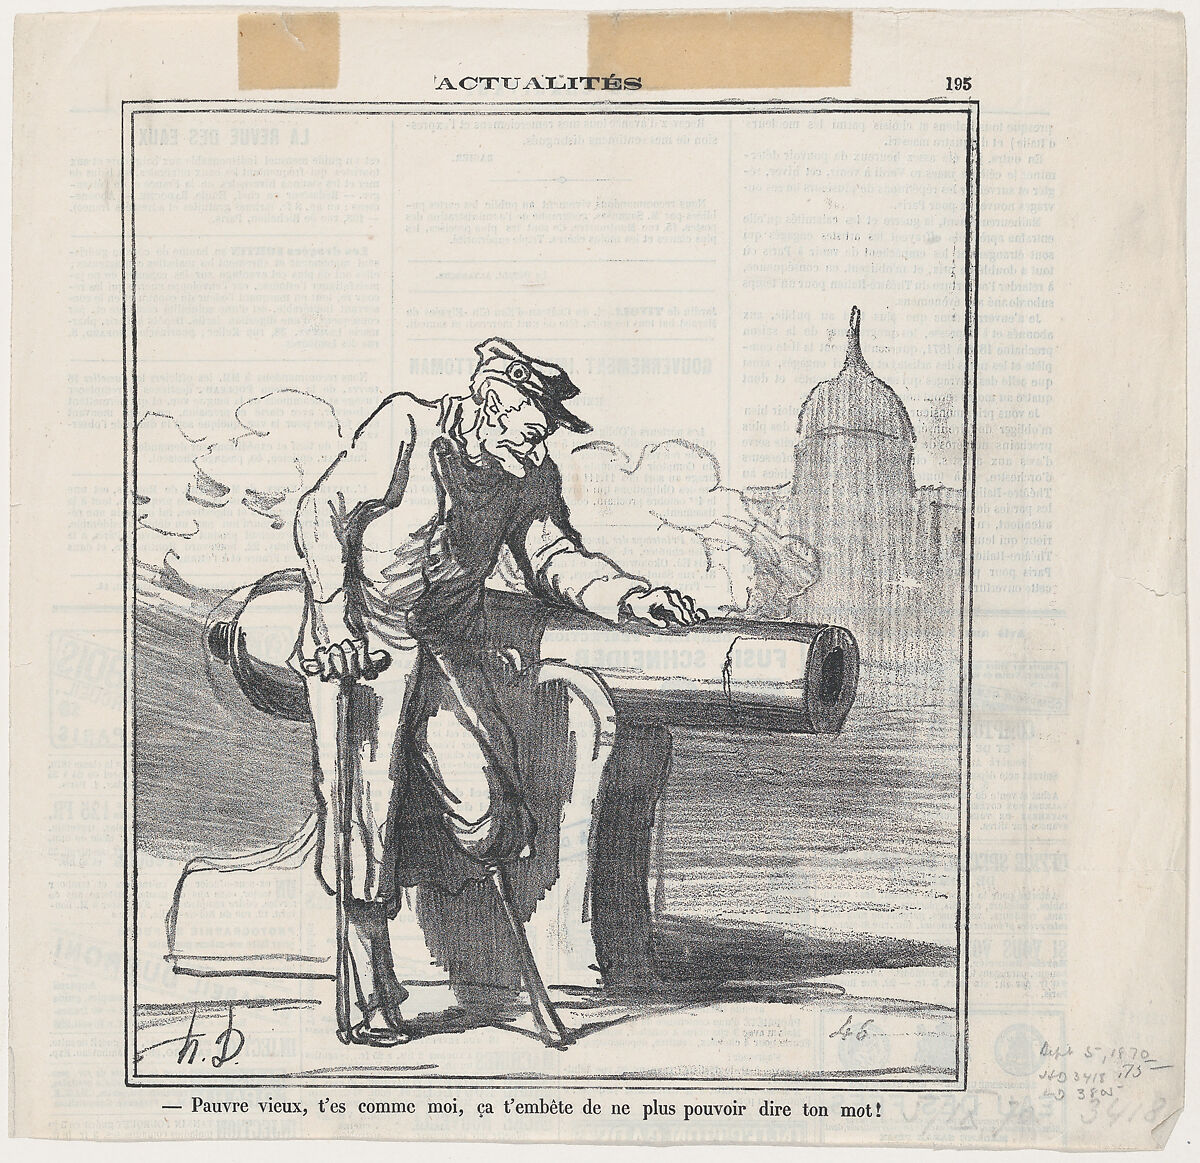 Poor old fellow. You are like me... it annoys you that you cannot speak up as you would like to, from 'News of the day,' published in "Le Charivari", Honoré Daumier (French, Marseilles 1808–1879 Valmondois), Lithograph on newsprint; second state of two (Delteil) 